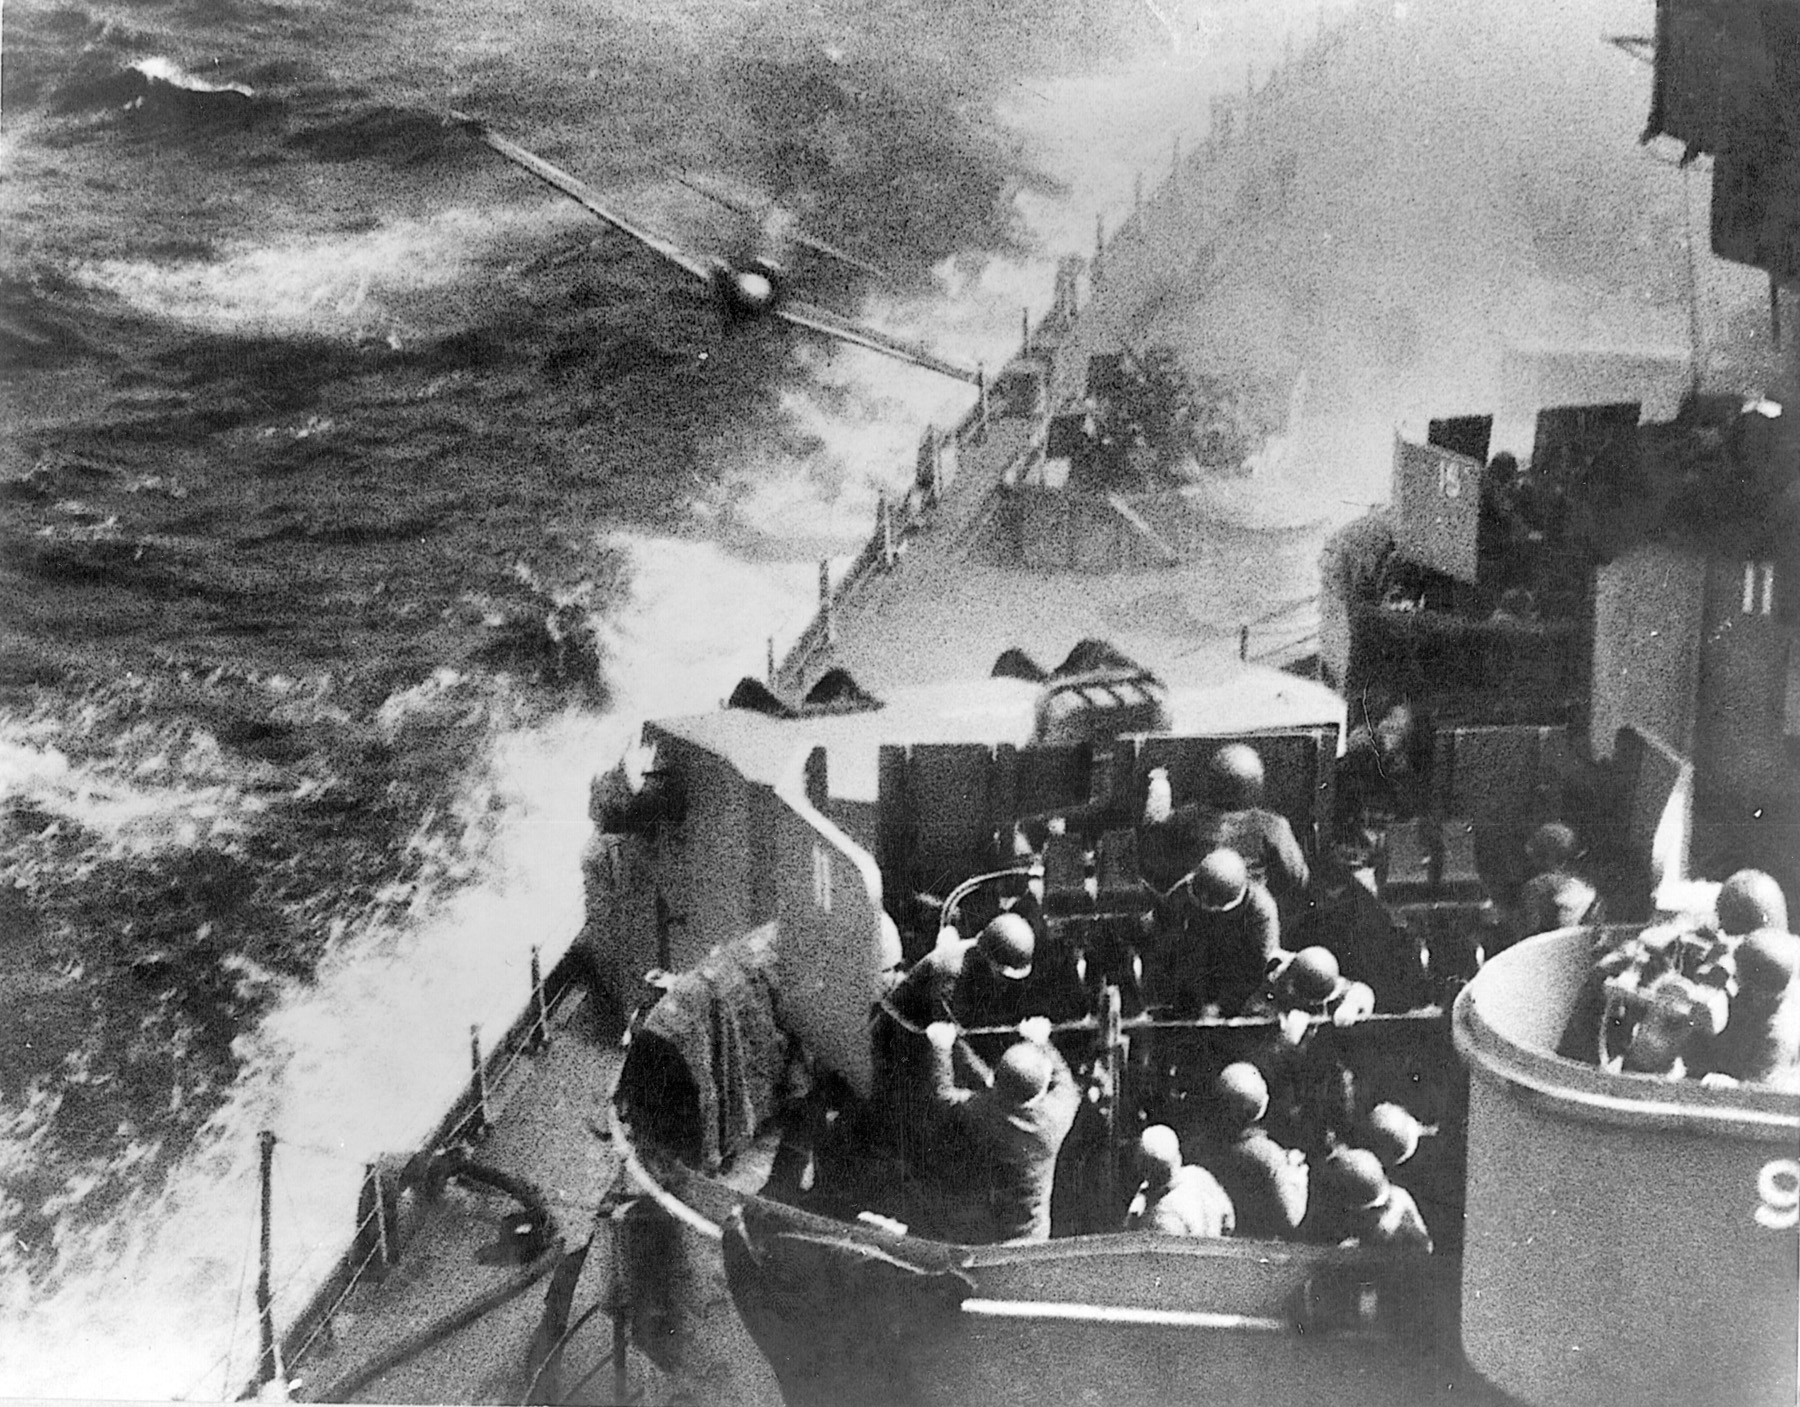 Gunners aboard the battleship USS Missouri work feverishly to take a diving Japanese kamikaze under fire. During the Battle of Okinawa, U.S. naval forces were repeatedly subjected to attacks by enemy suicide planes.